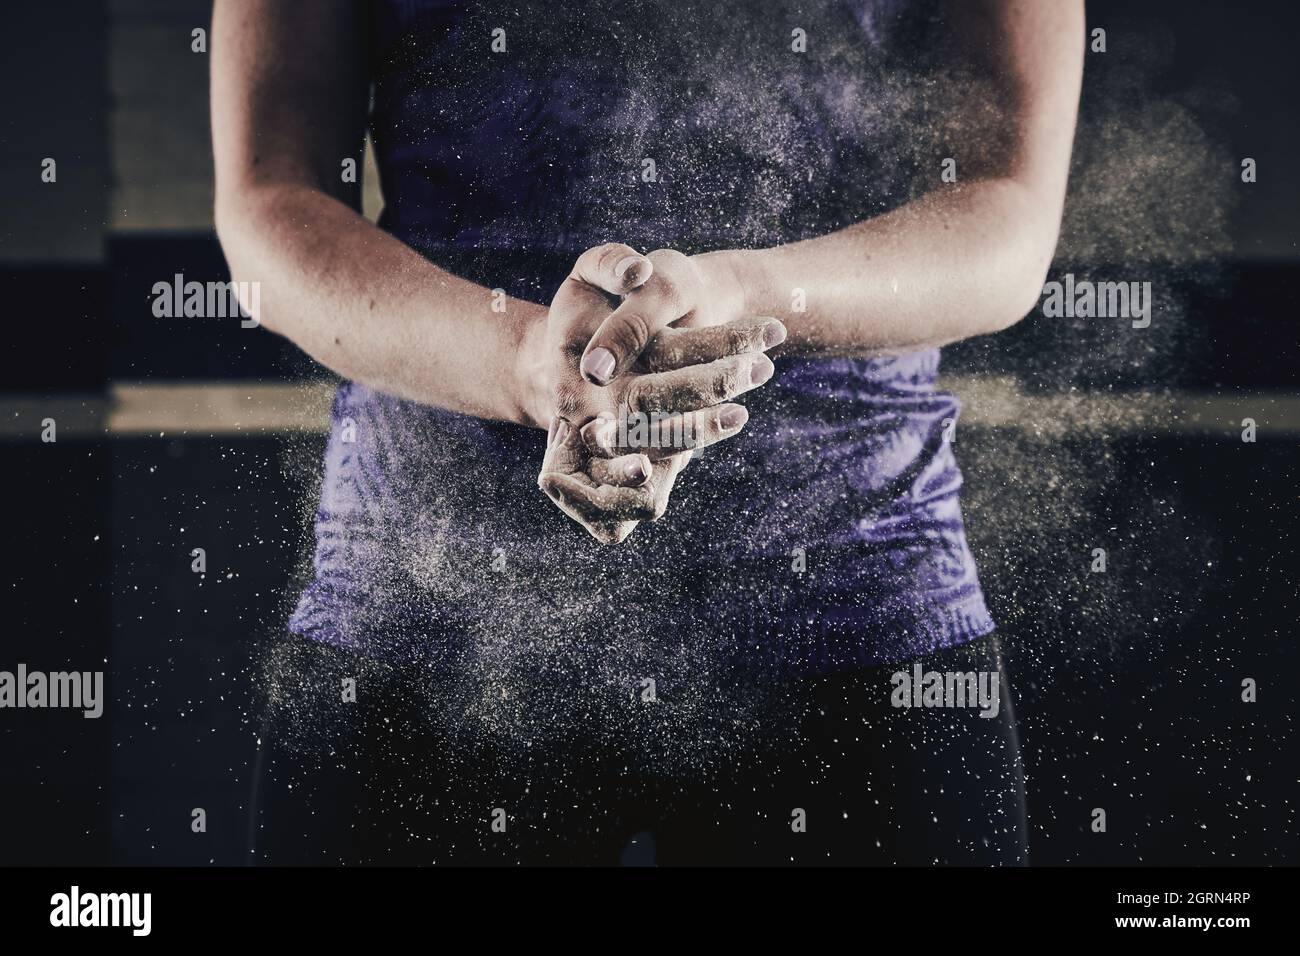 Female athlete clapping hands with chalk dust for weight lifting Stock Photo